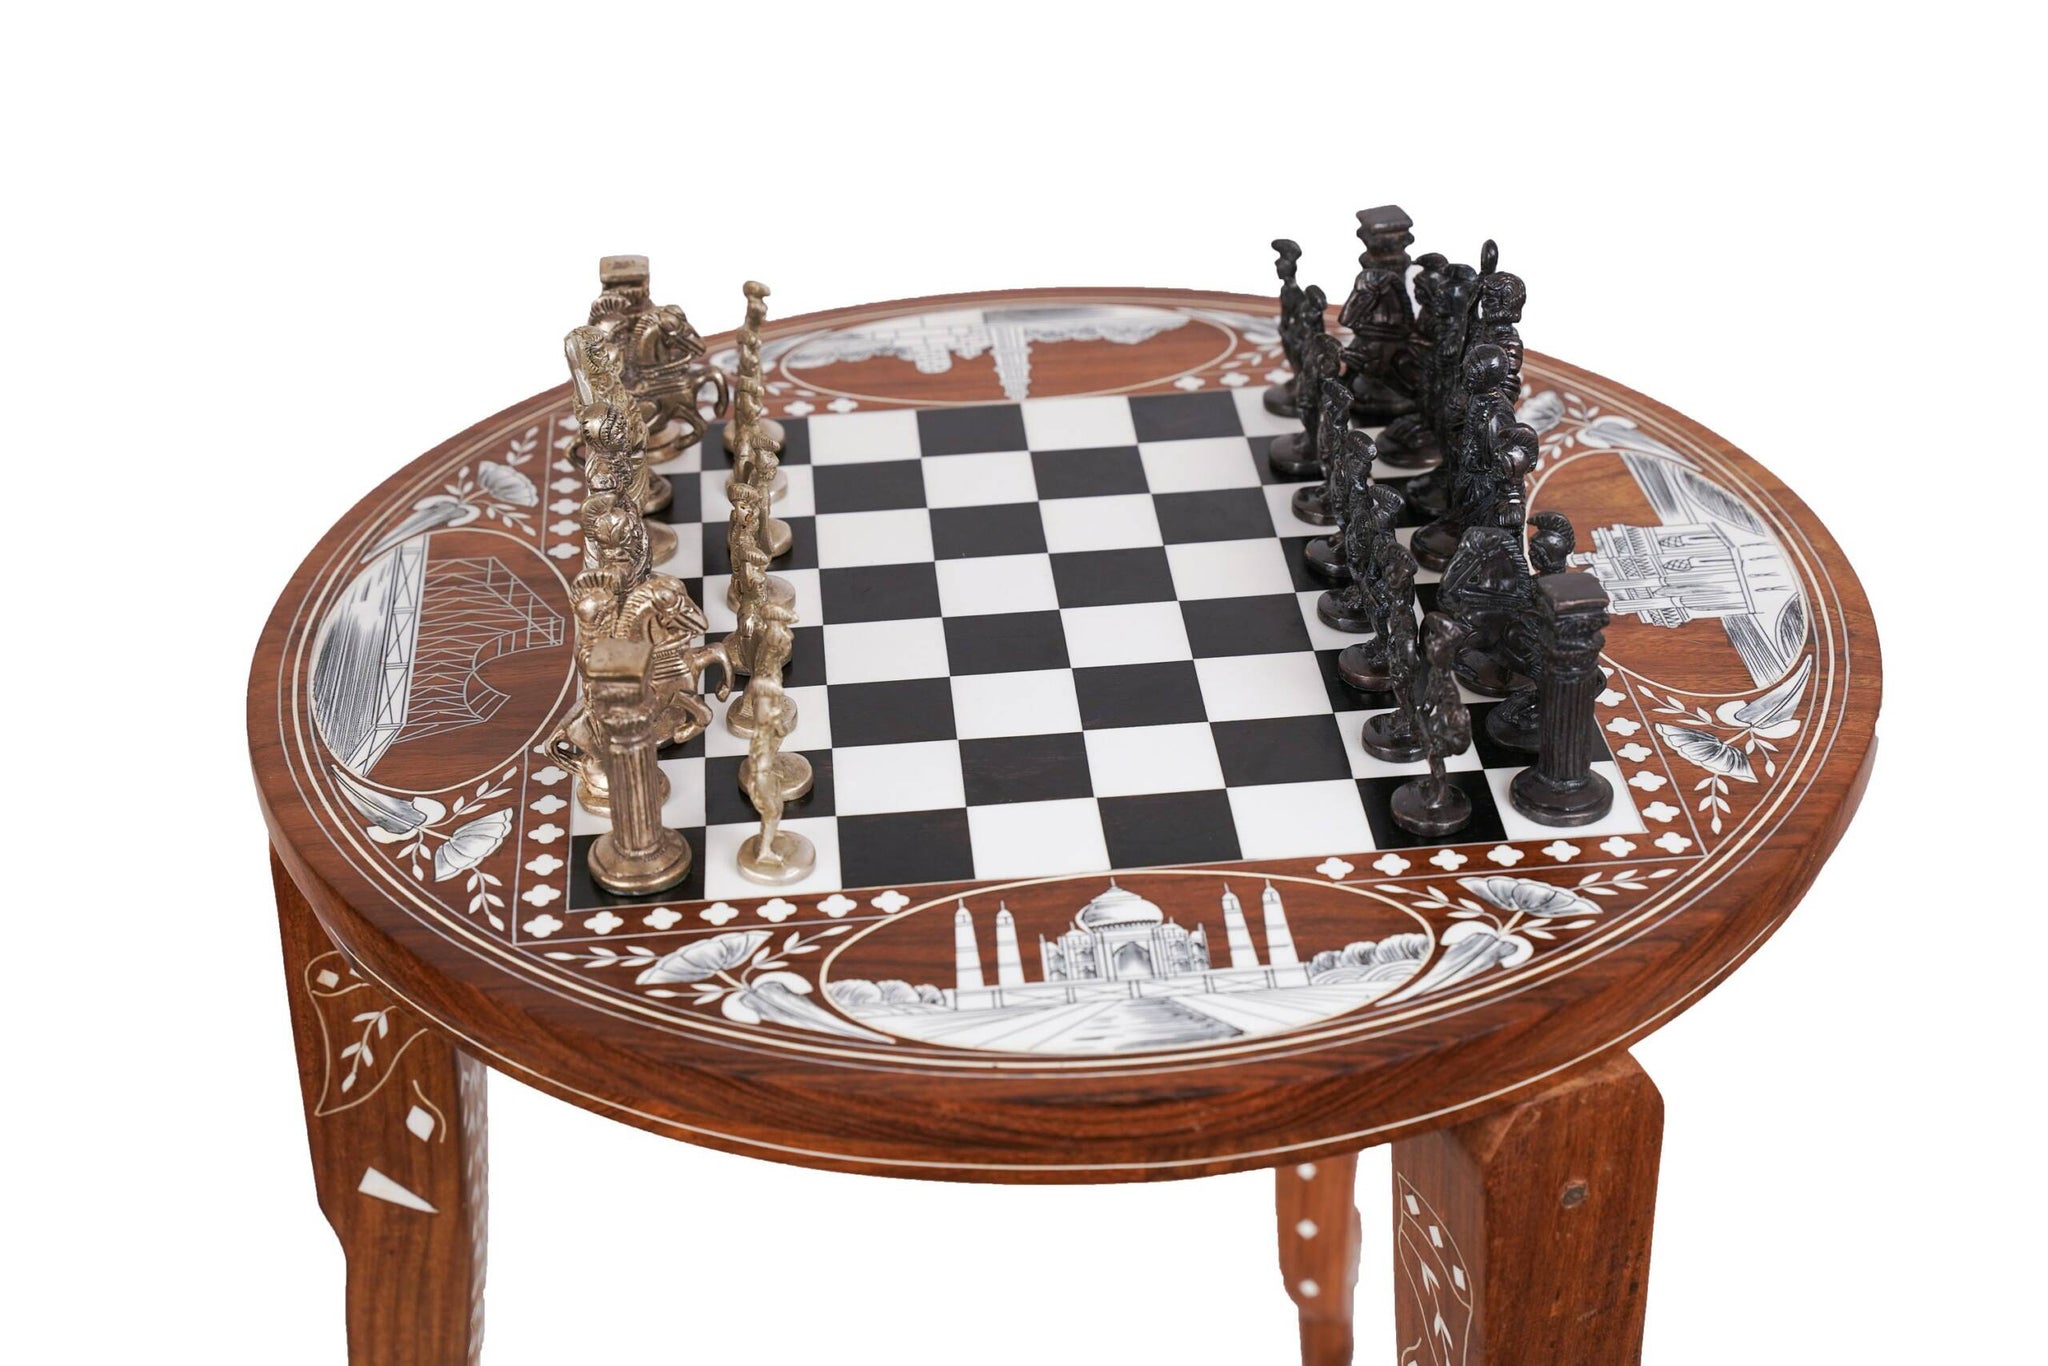 Wooden Board Game & Weighted Pieces Set - Living Room Decors for Lovers